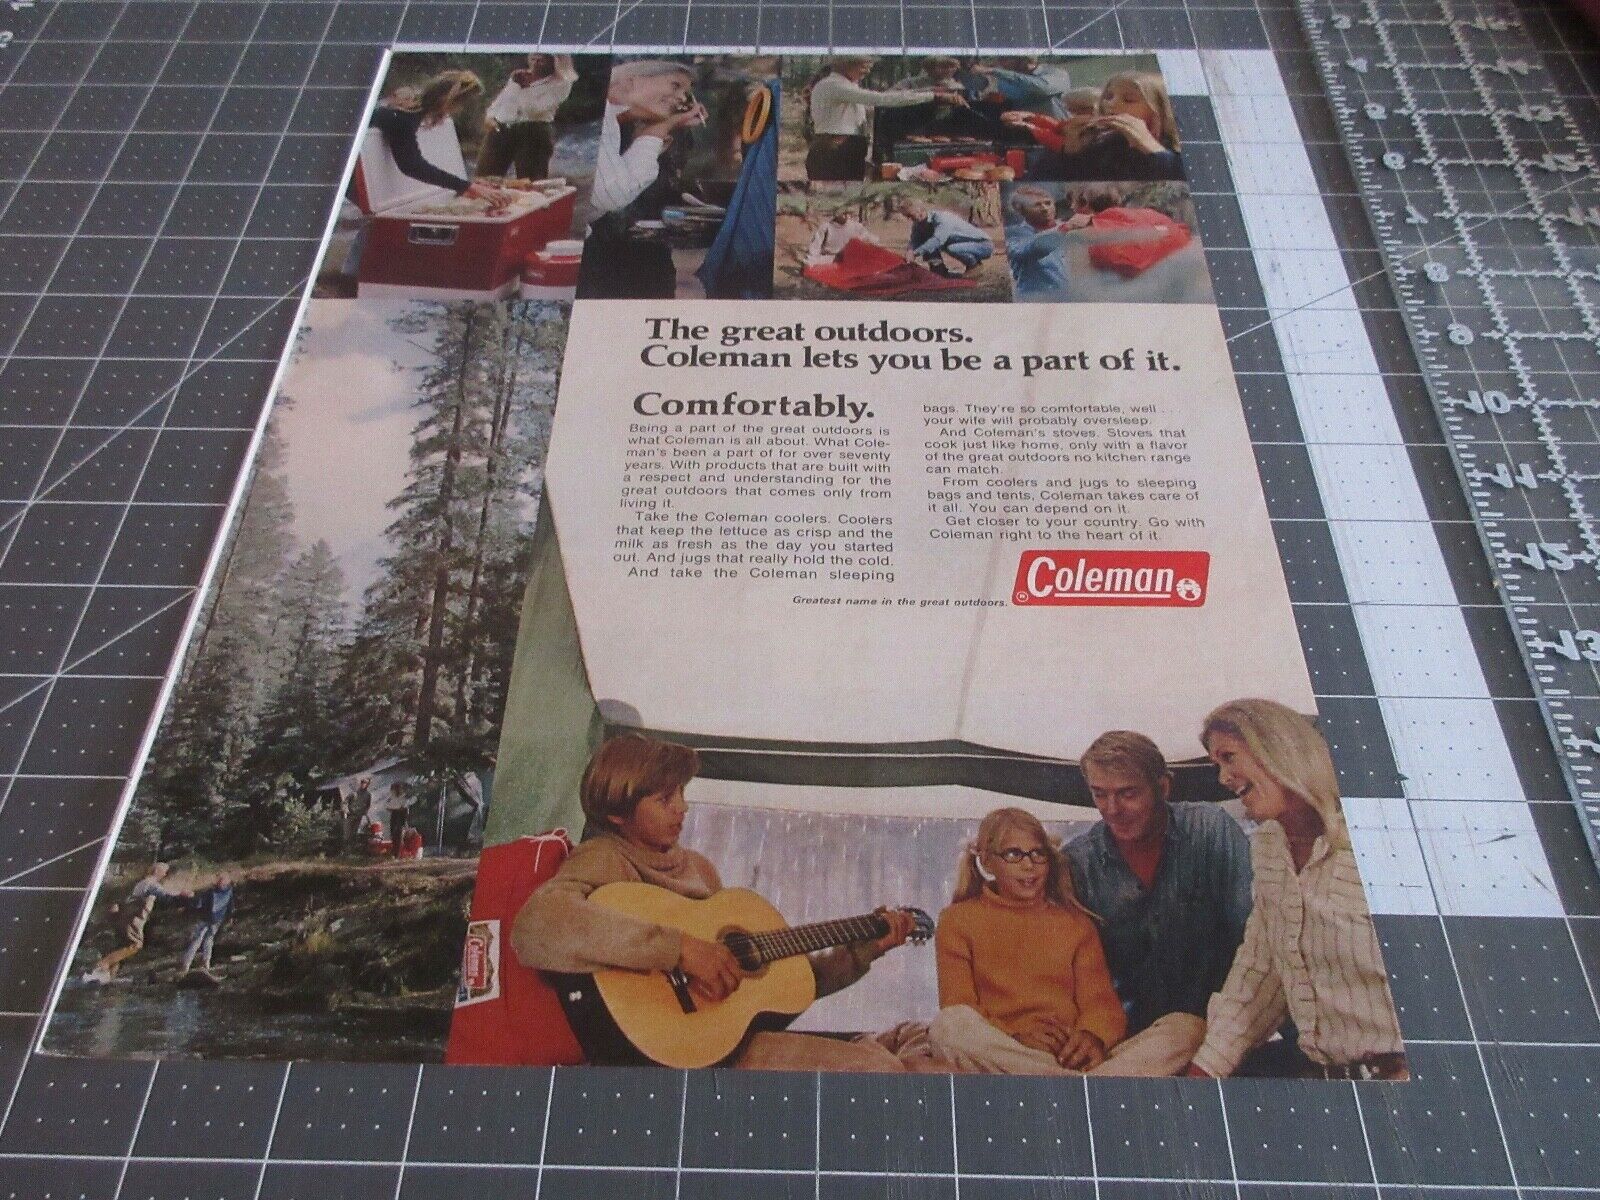 1972 COLEMAN The Great Outdoors -vintage print ad